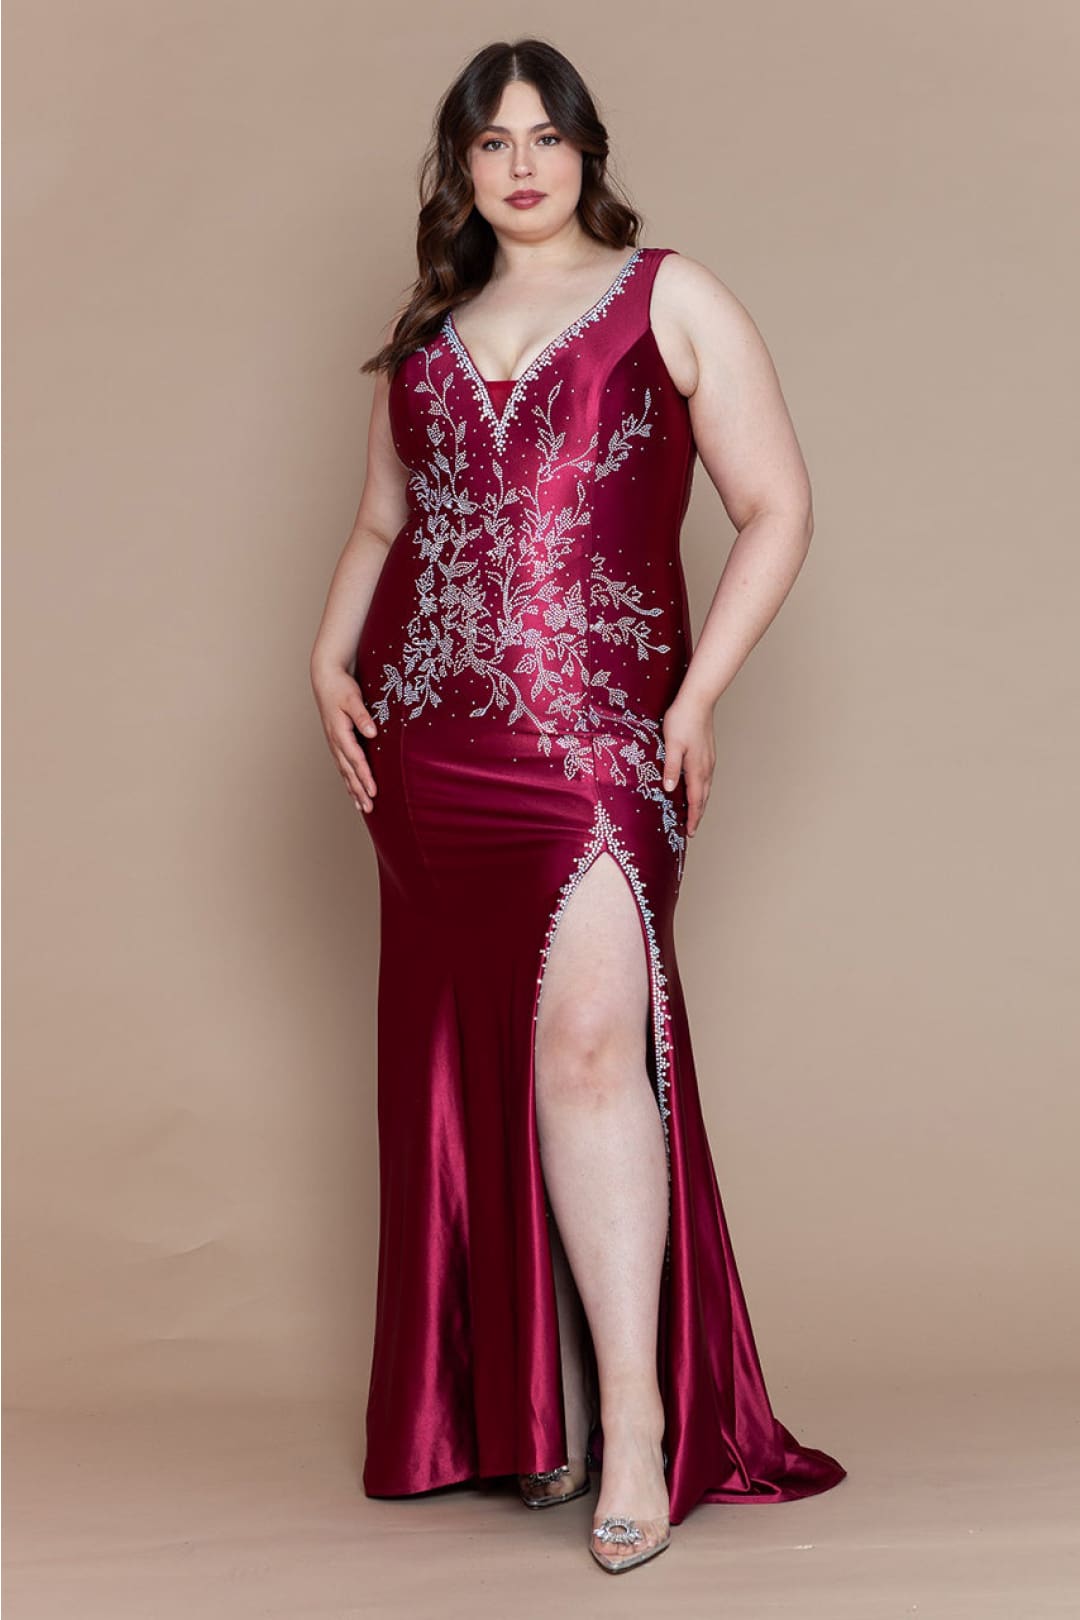 Poly USA W1132 Plus Size Lace up Back Prom Evening Gown - WINE / 14W Dress